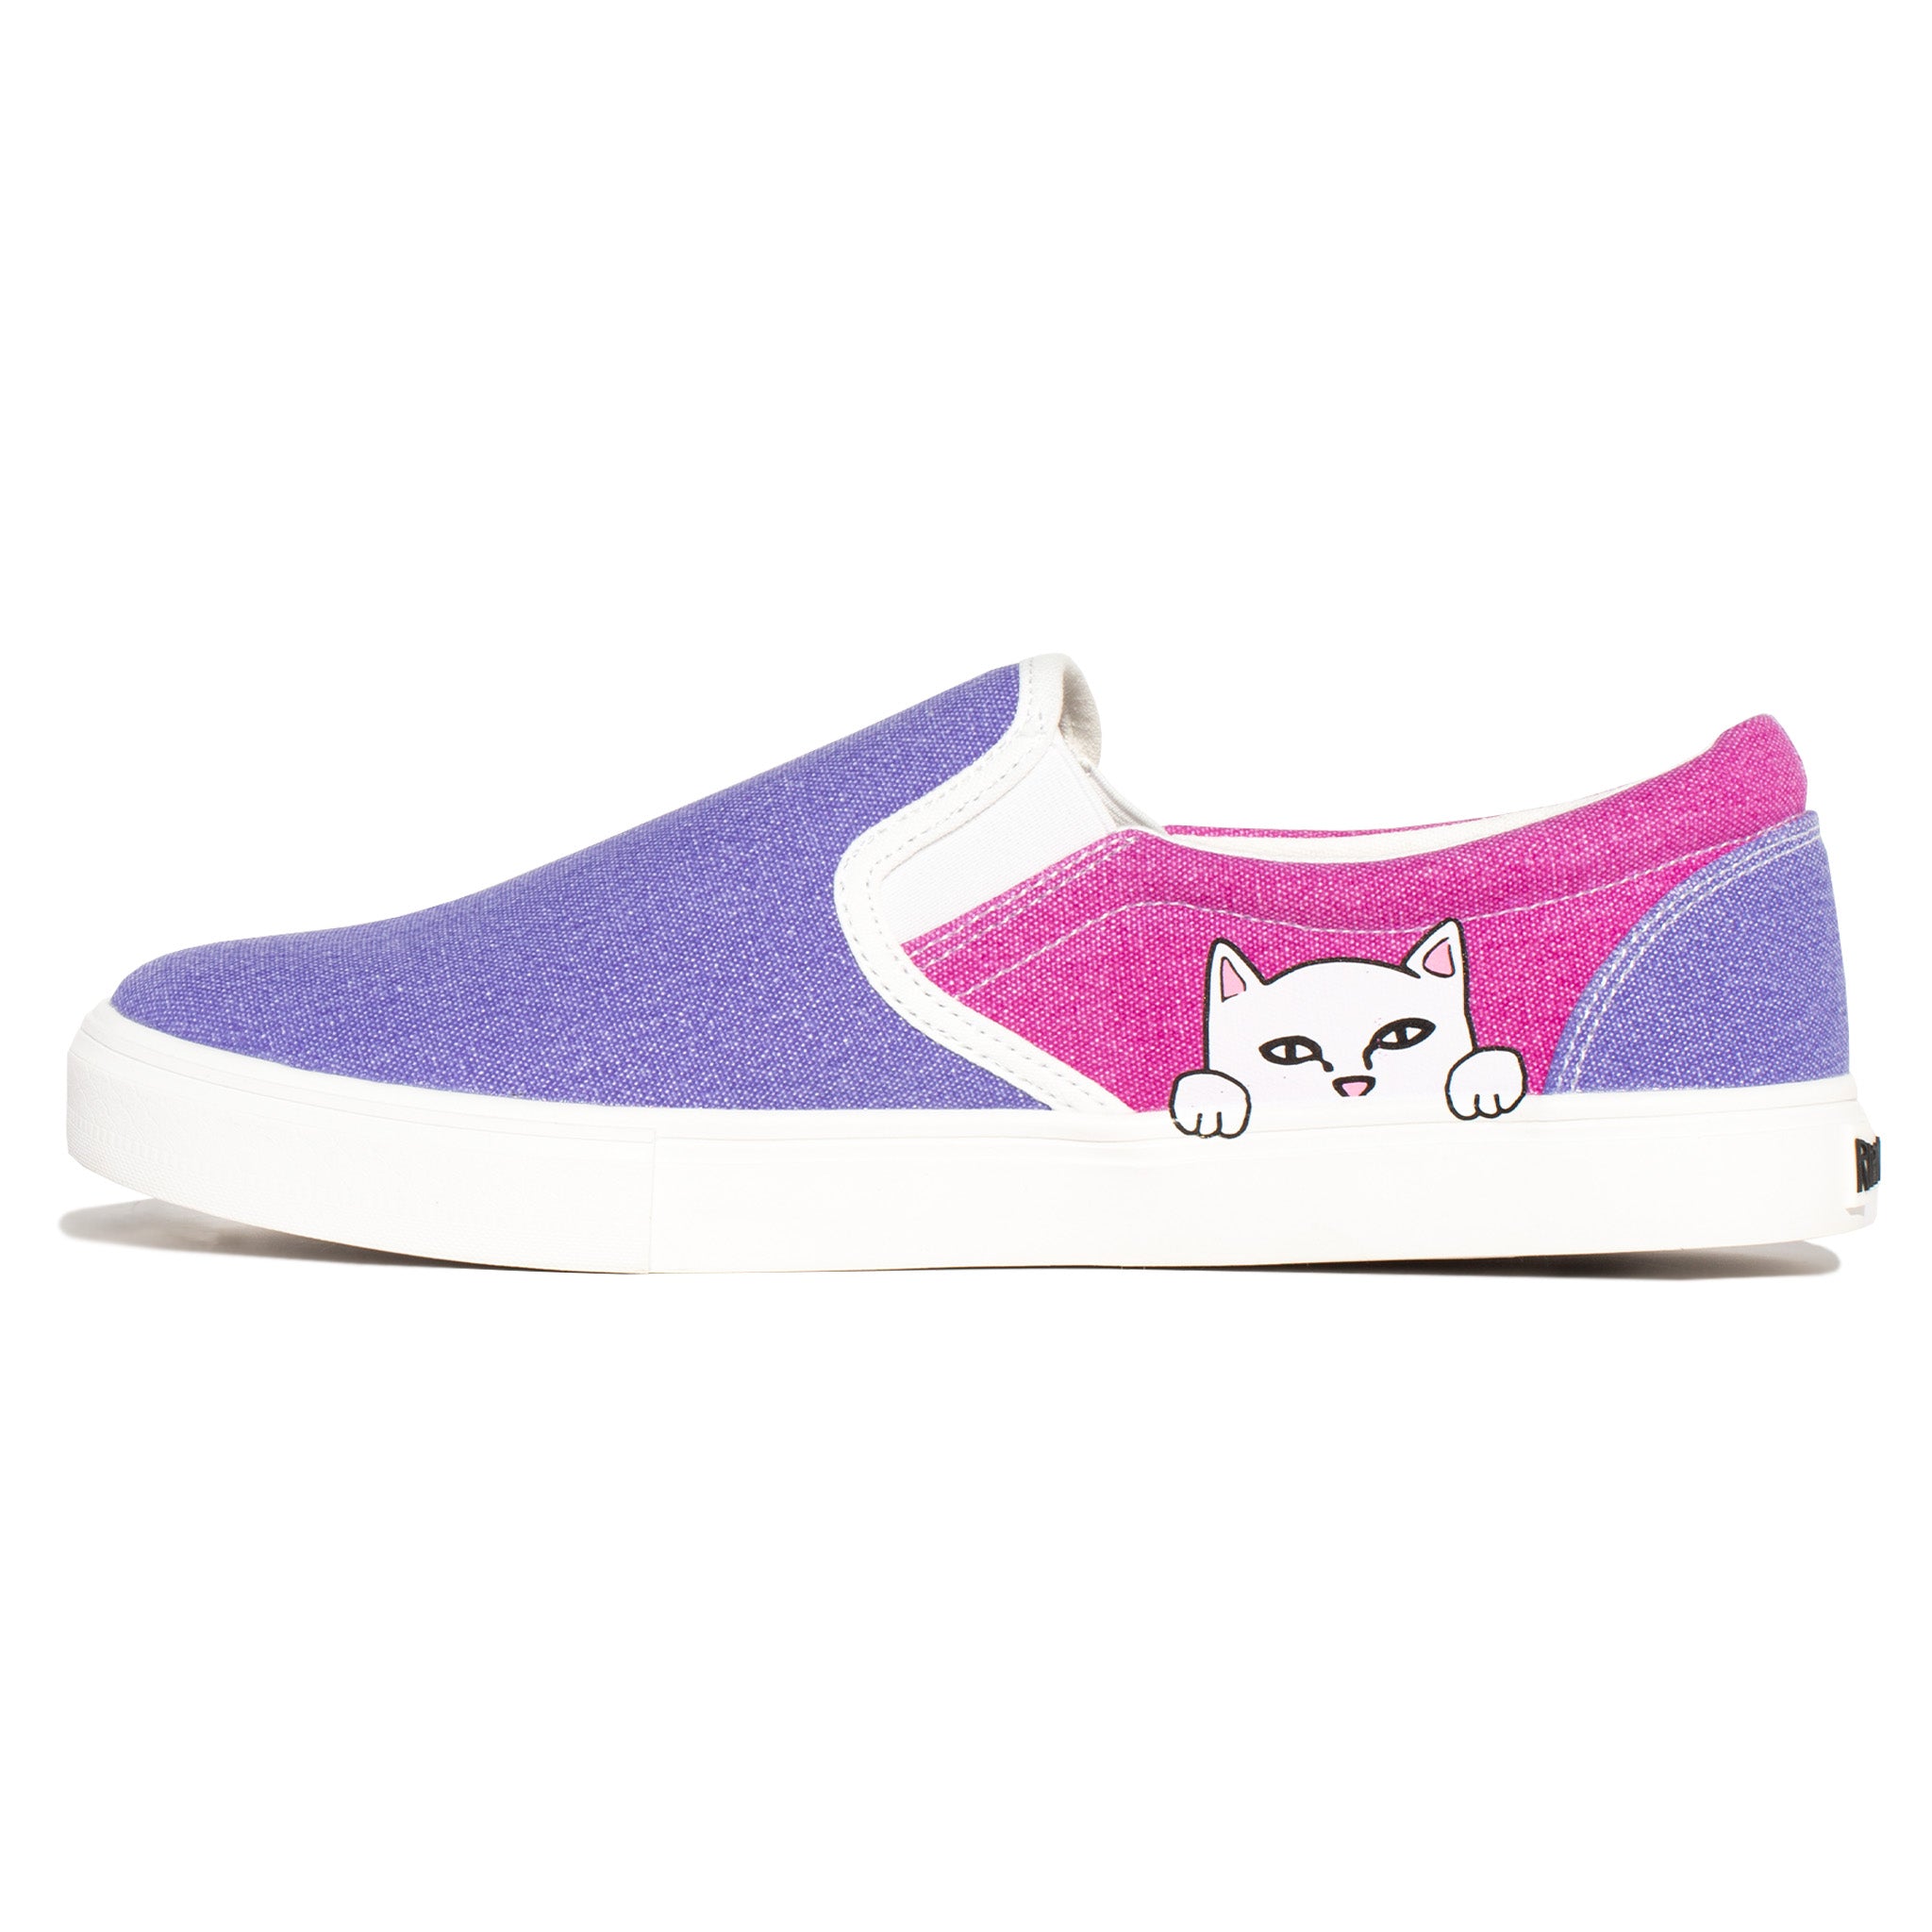 341576 Lord Nermal UV Activated Slip Ons (Blue/Fuschia)